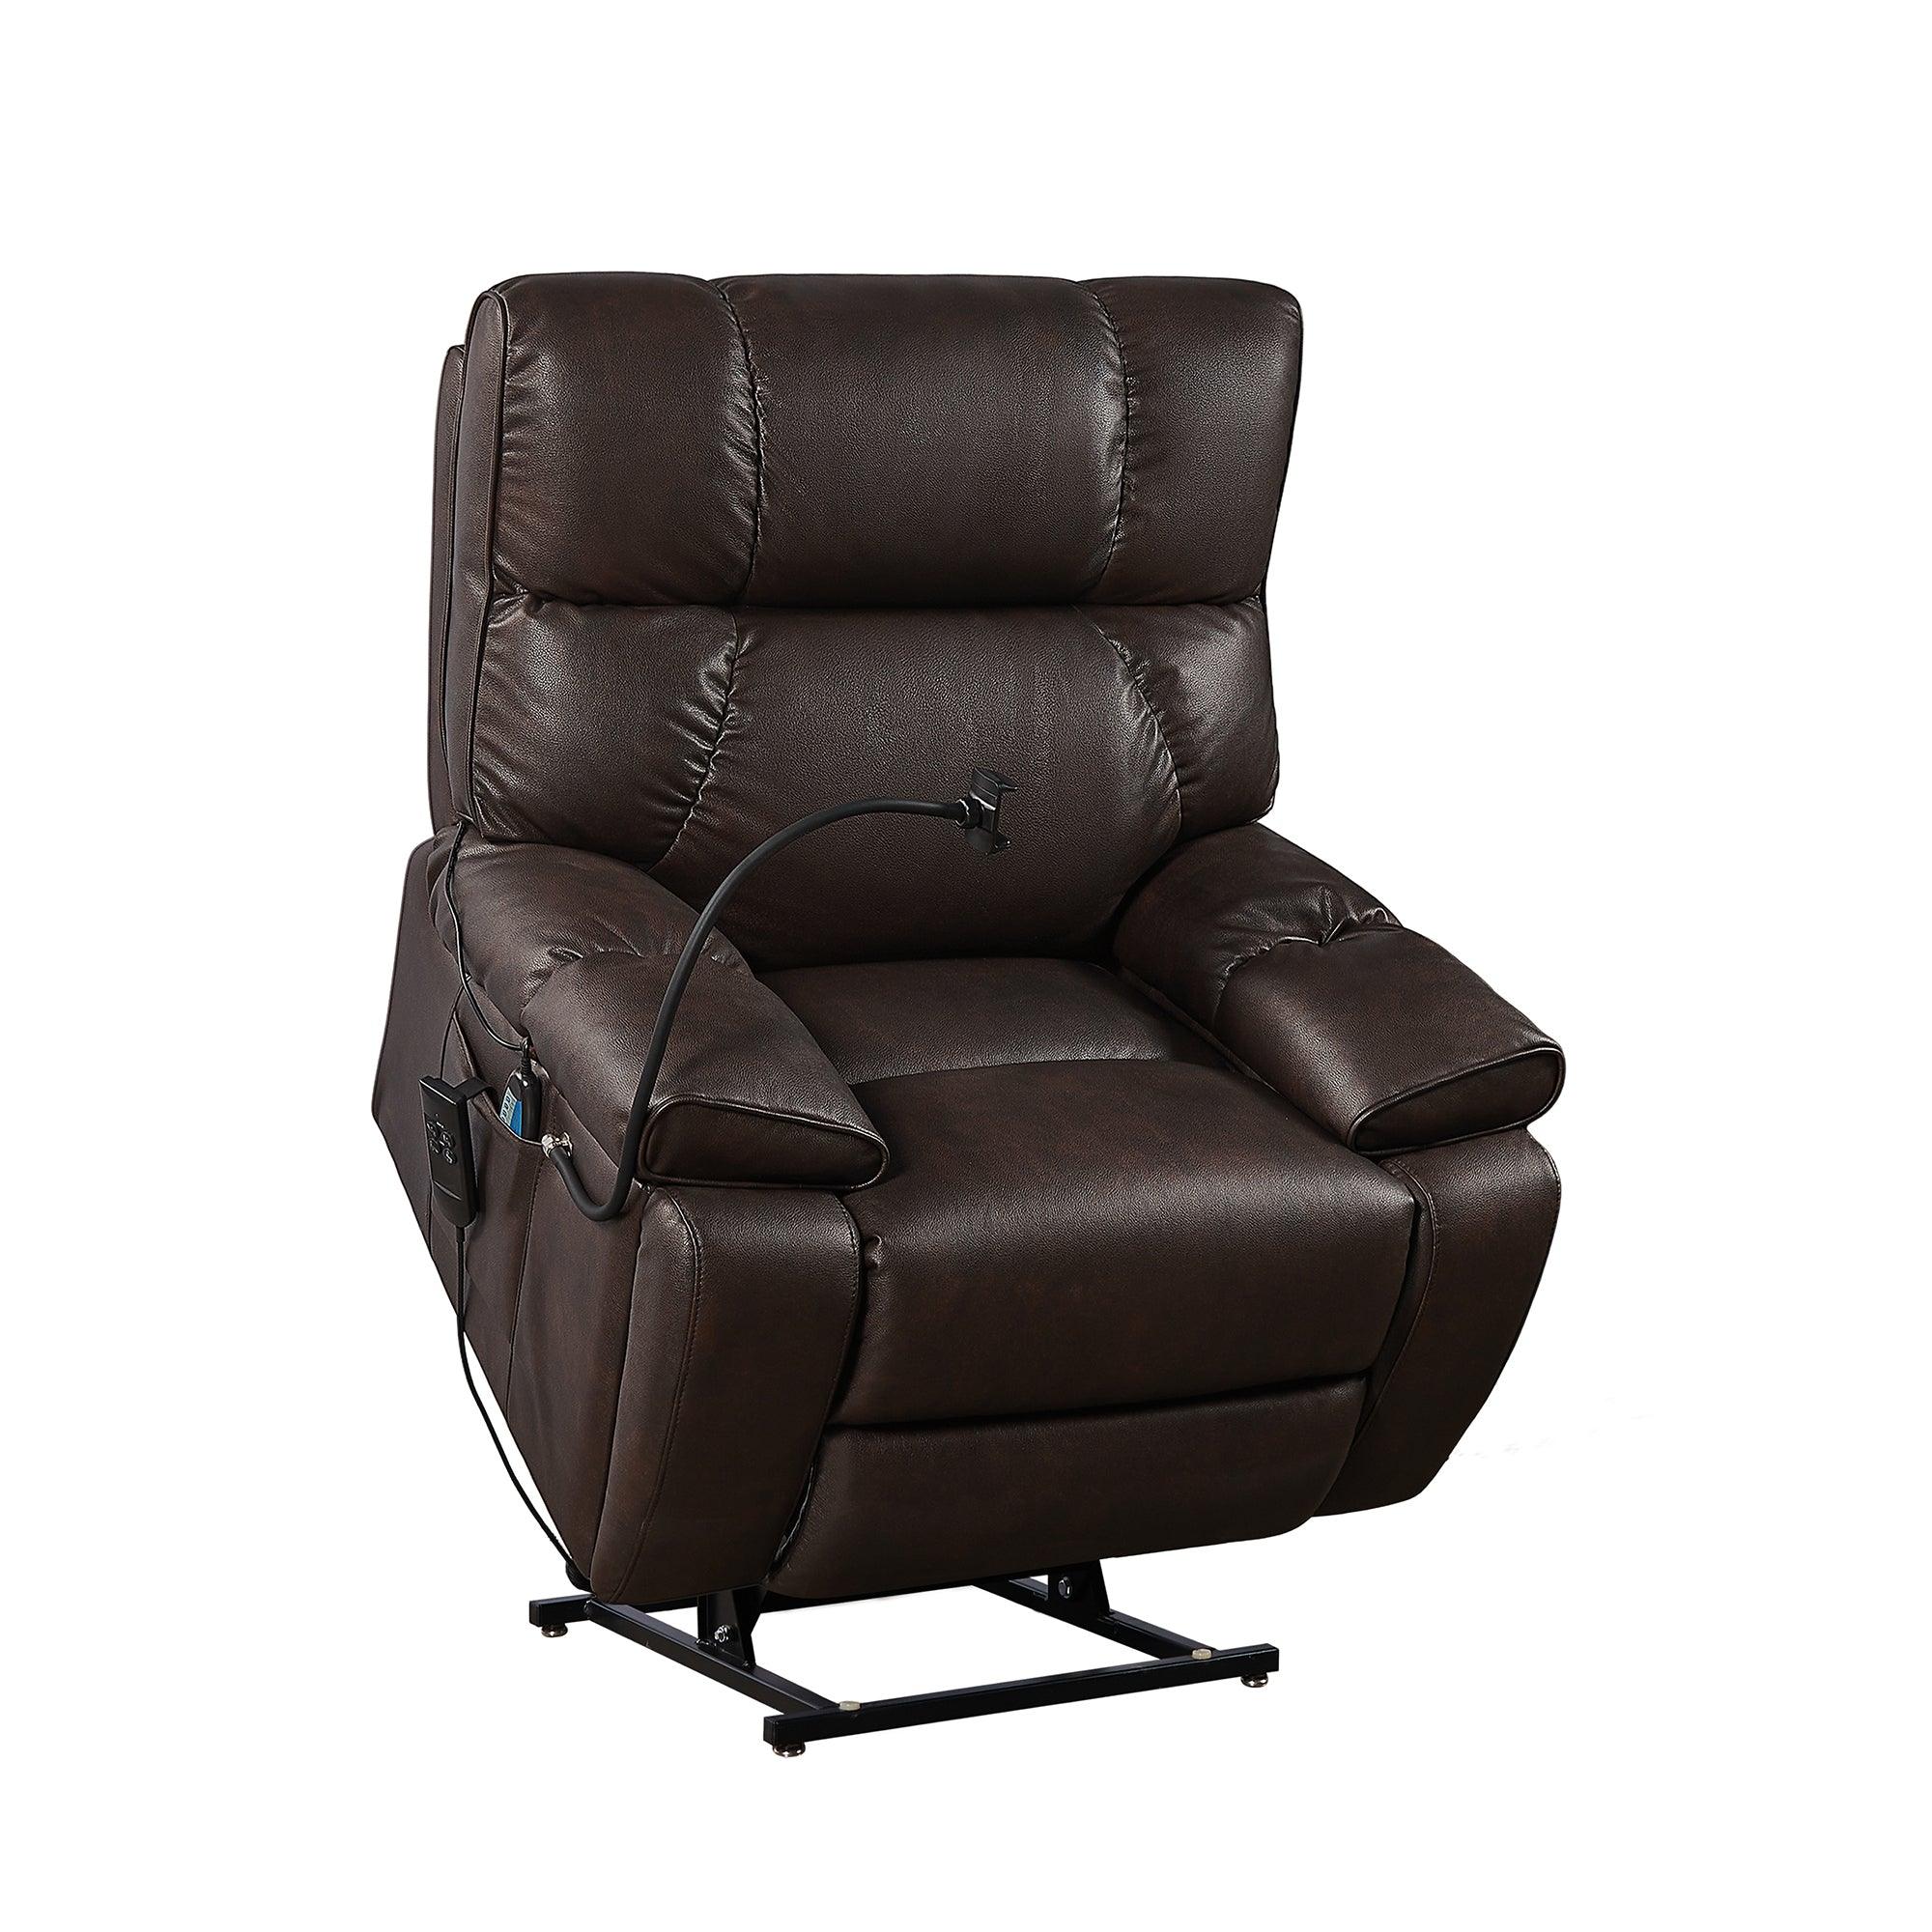 Lift Recliner Chair, three position, lifted